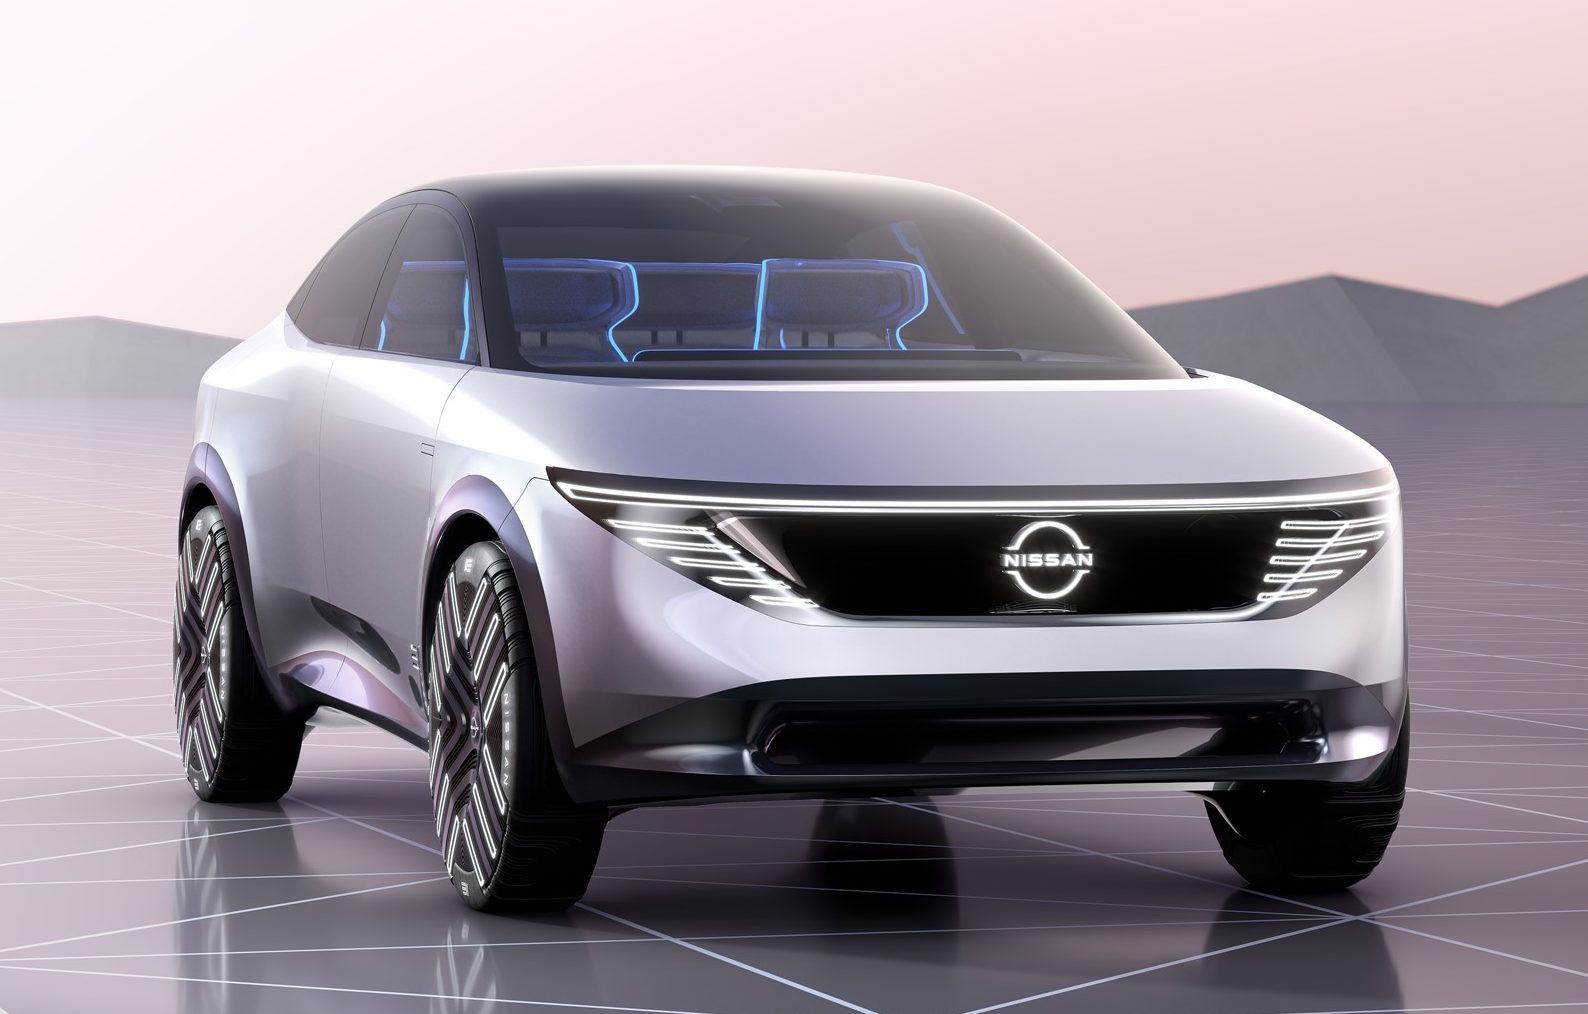 nissan chill out concept e1638218739158